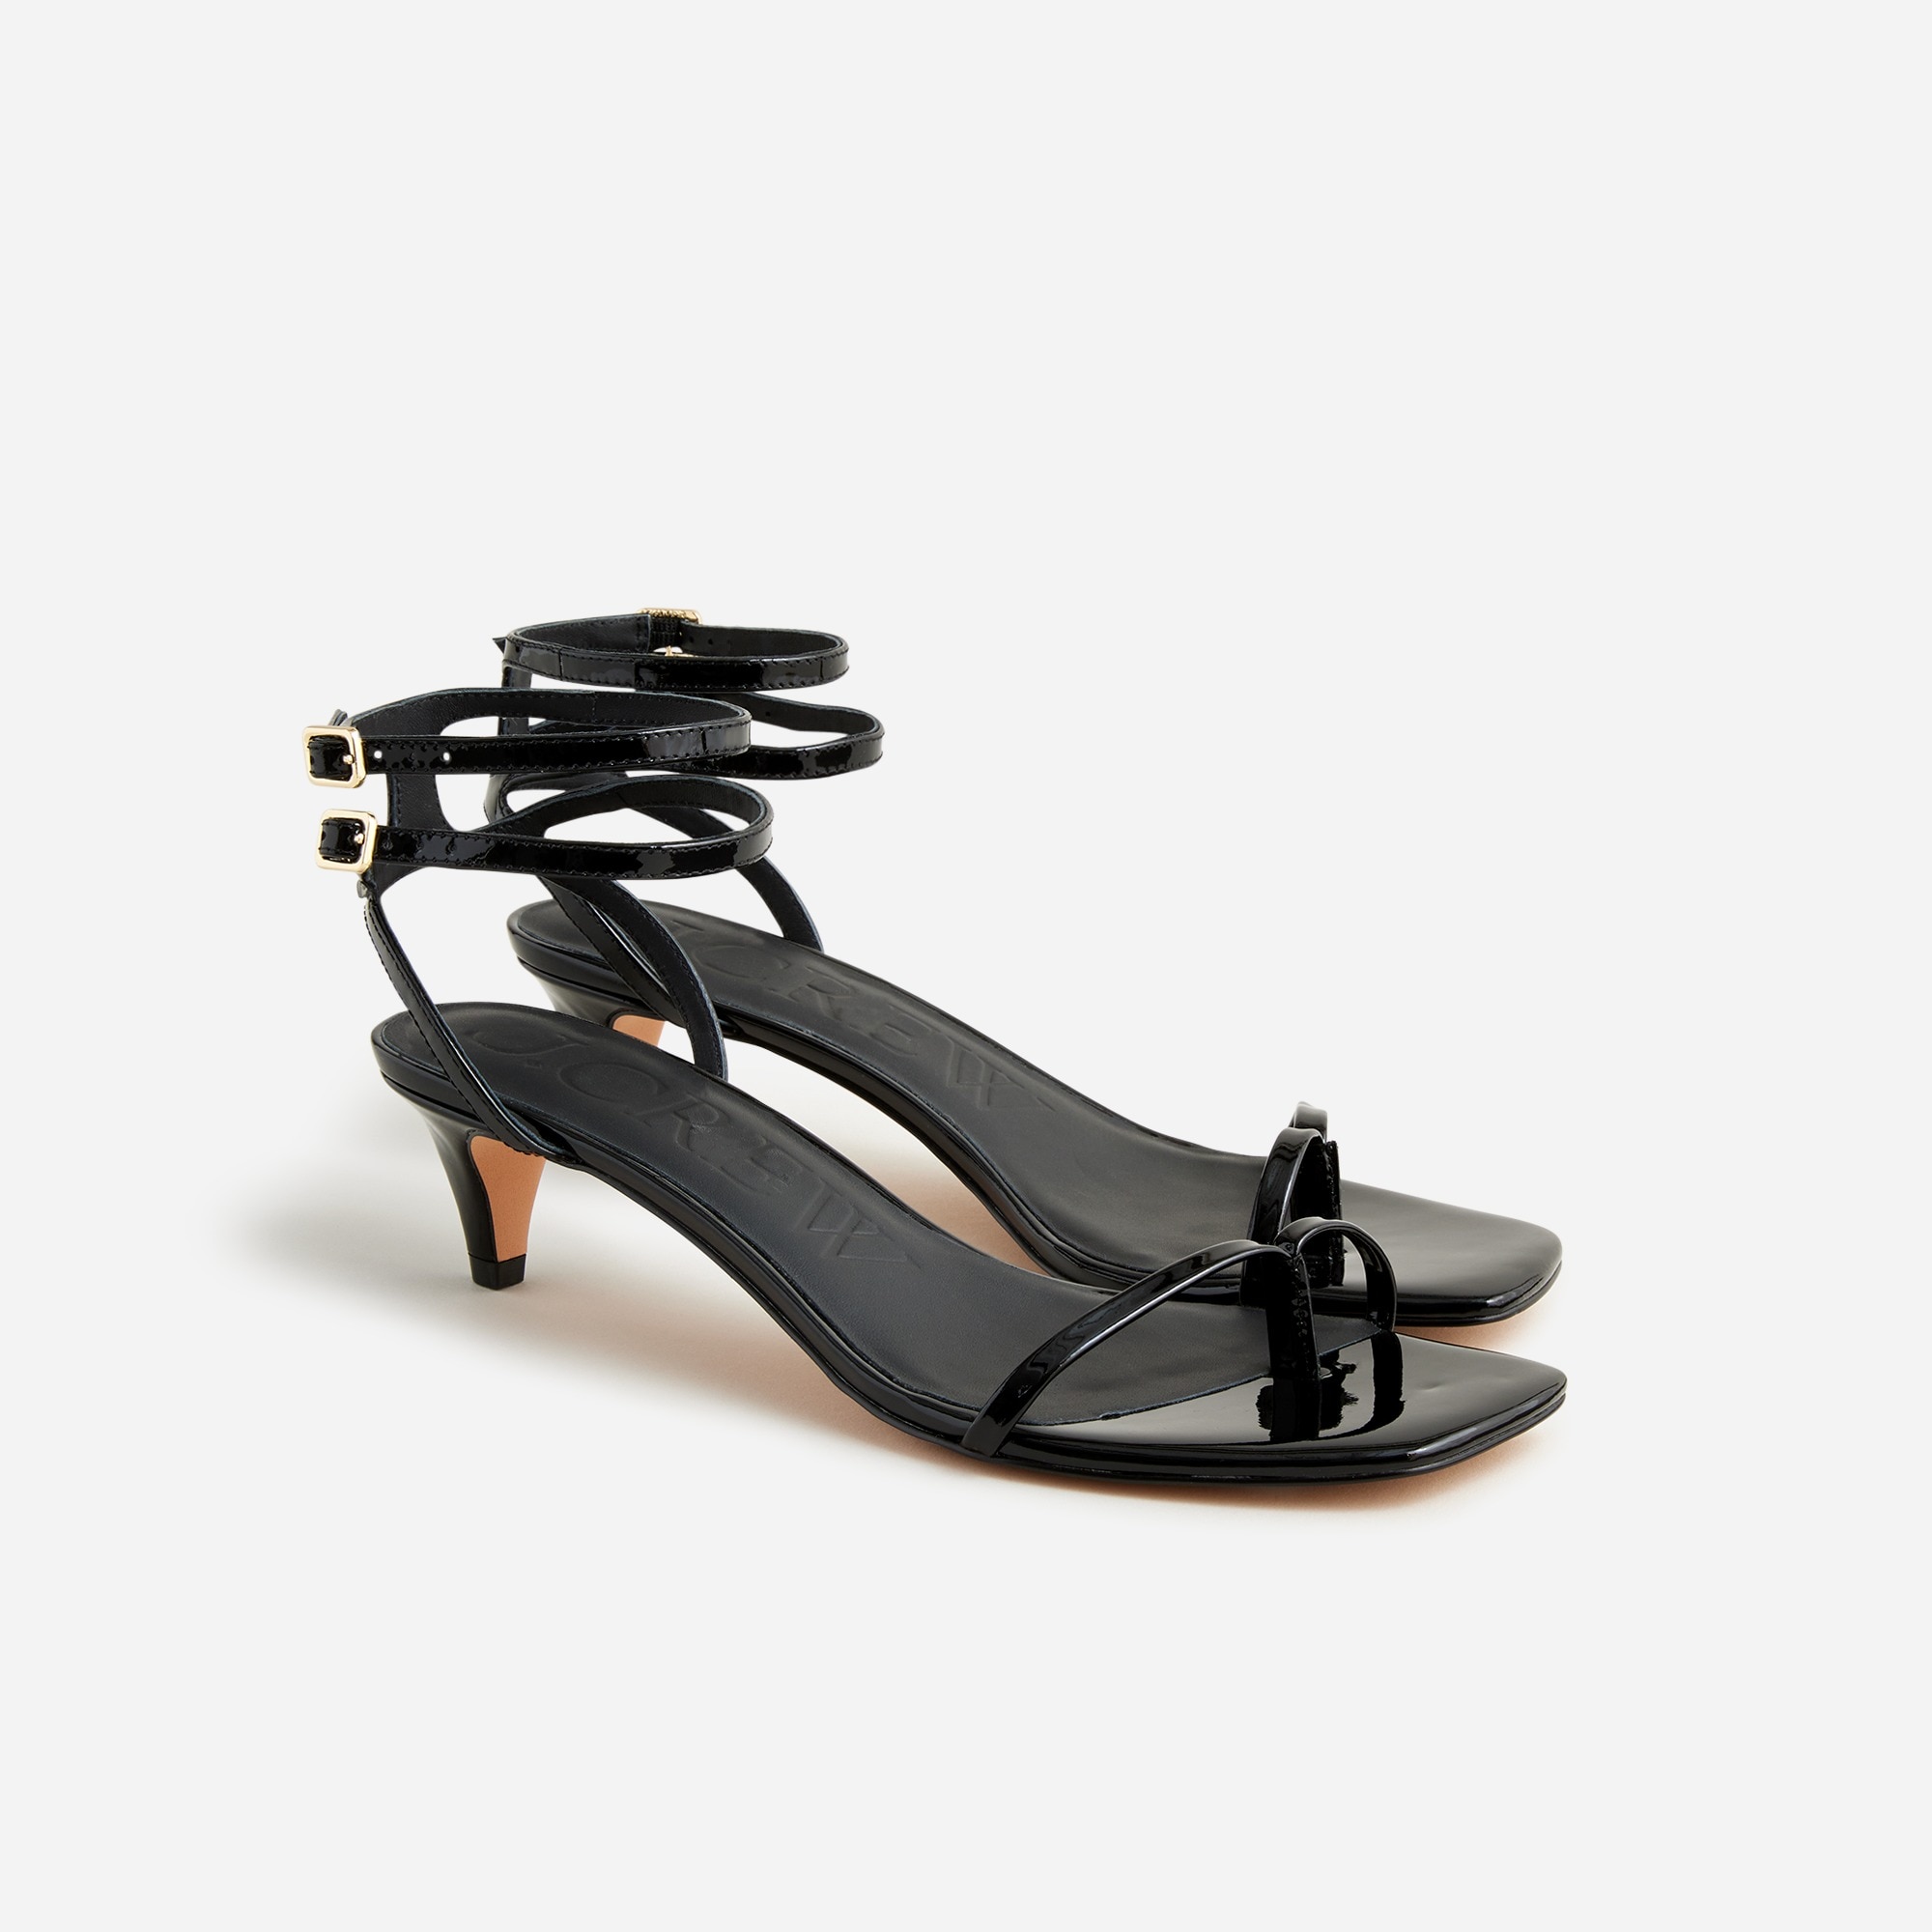  Zadie double ankle-strap heels in leather